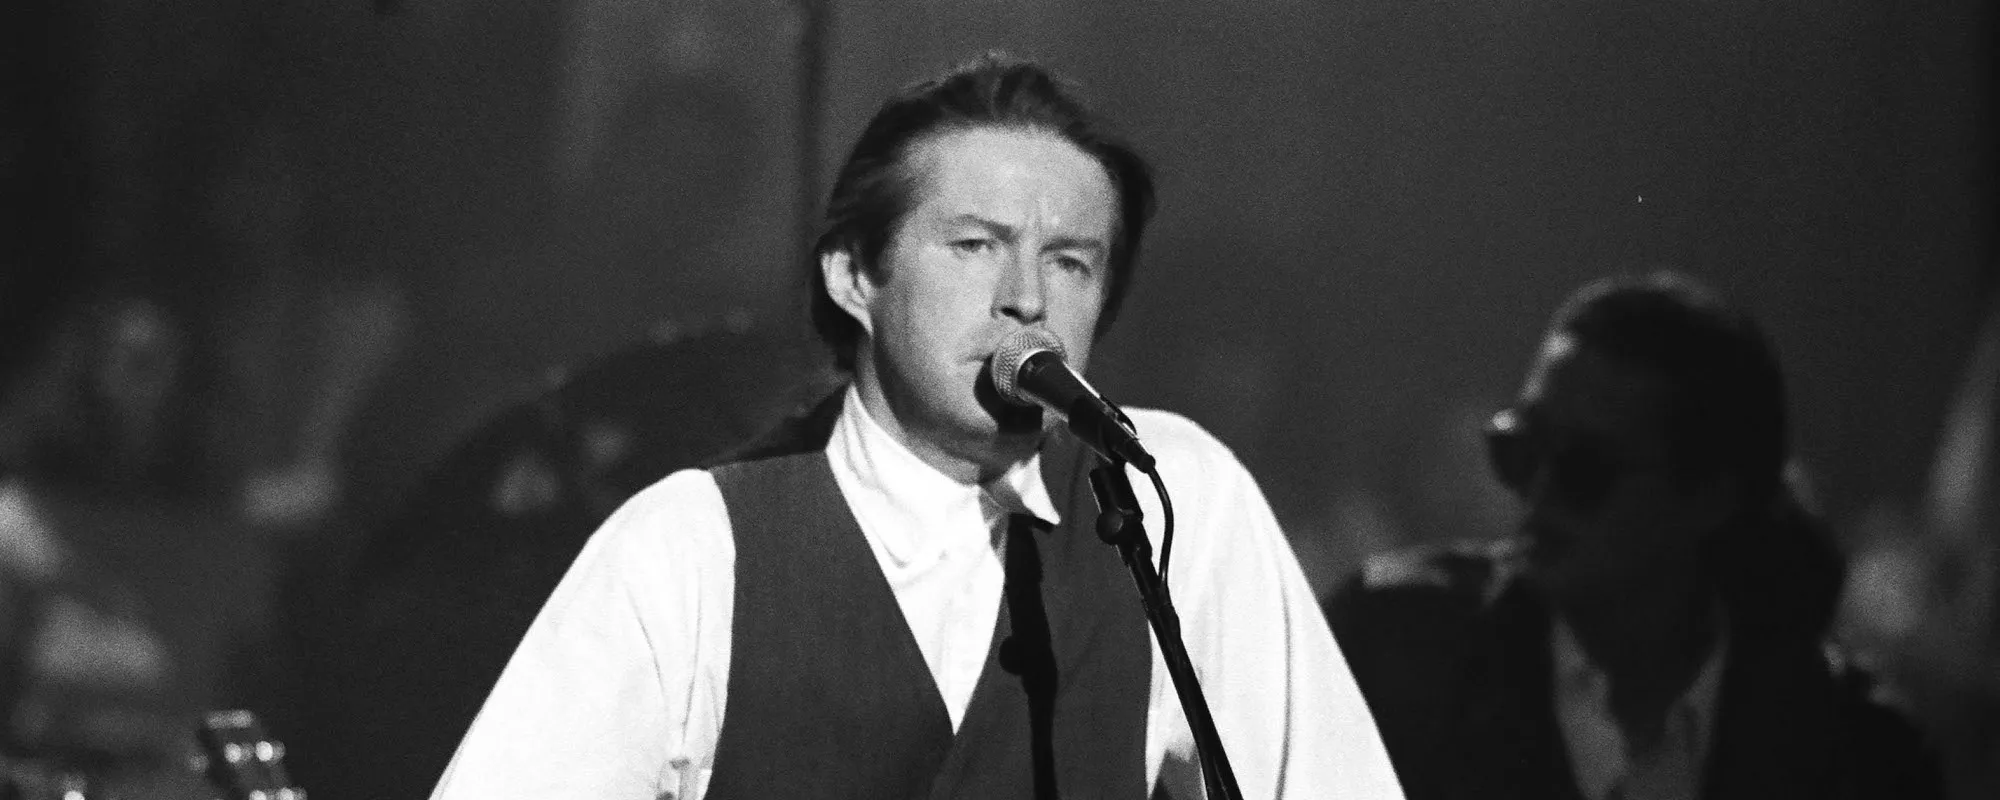 The Meaning, and Writer, Behind Don Henley’s 1984 Hit “All She Wants to Do is Dance”